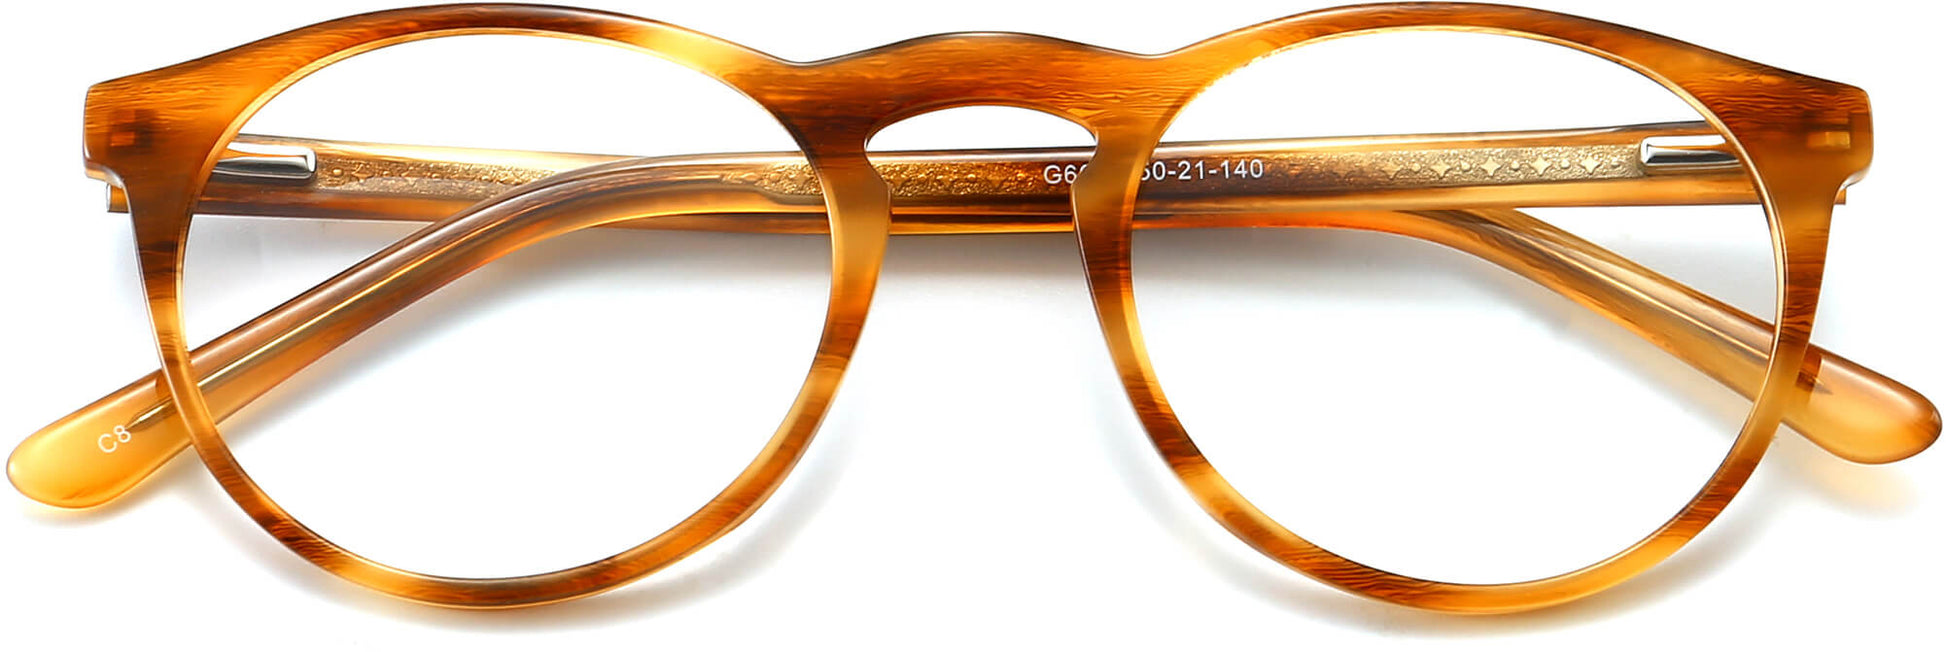 Dudley round tortoise Eyeglasses from ANRRI, closed view